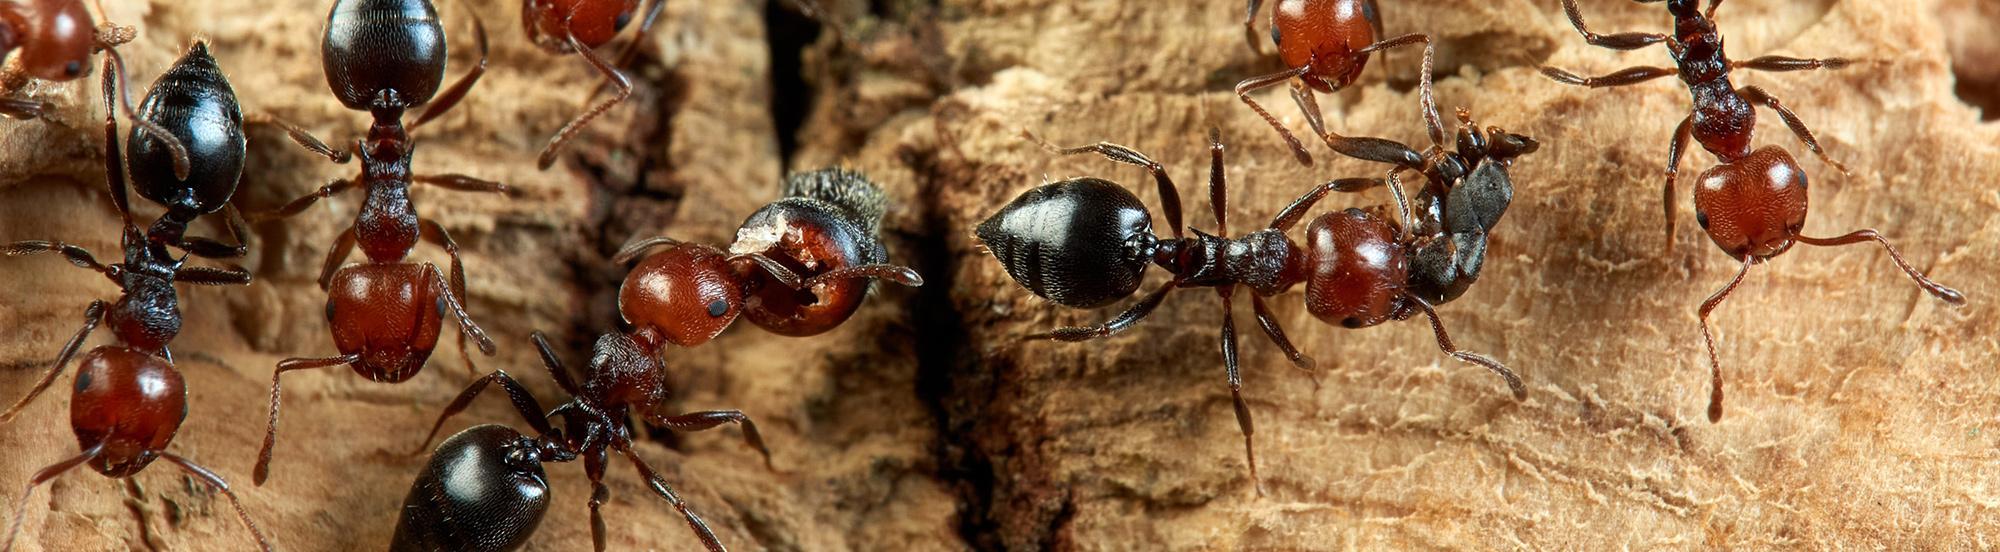 acrobat ants searching for food